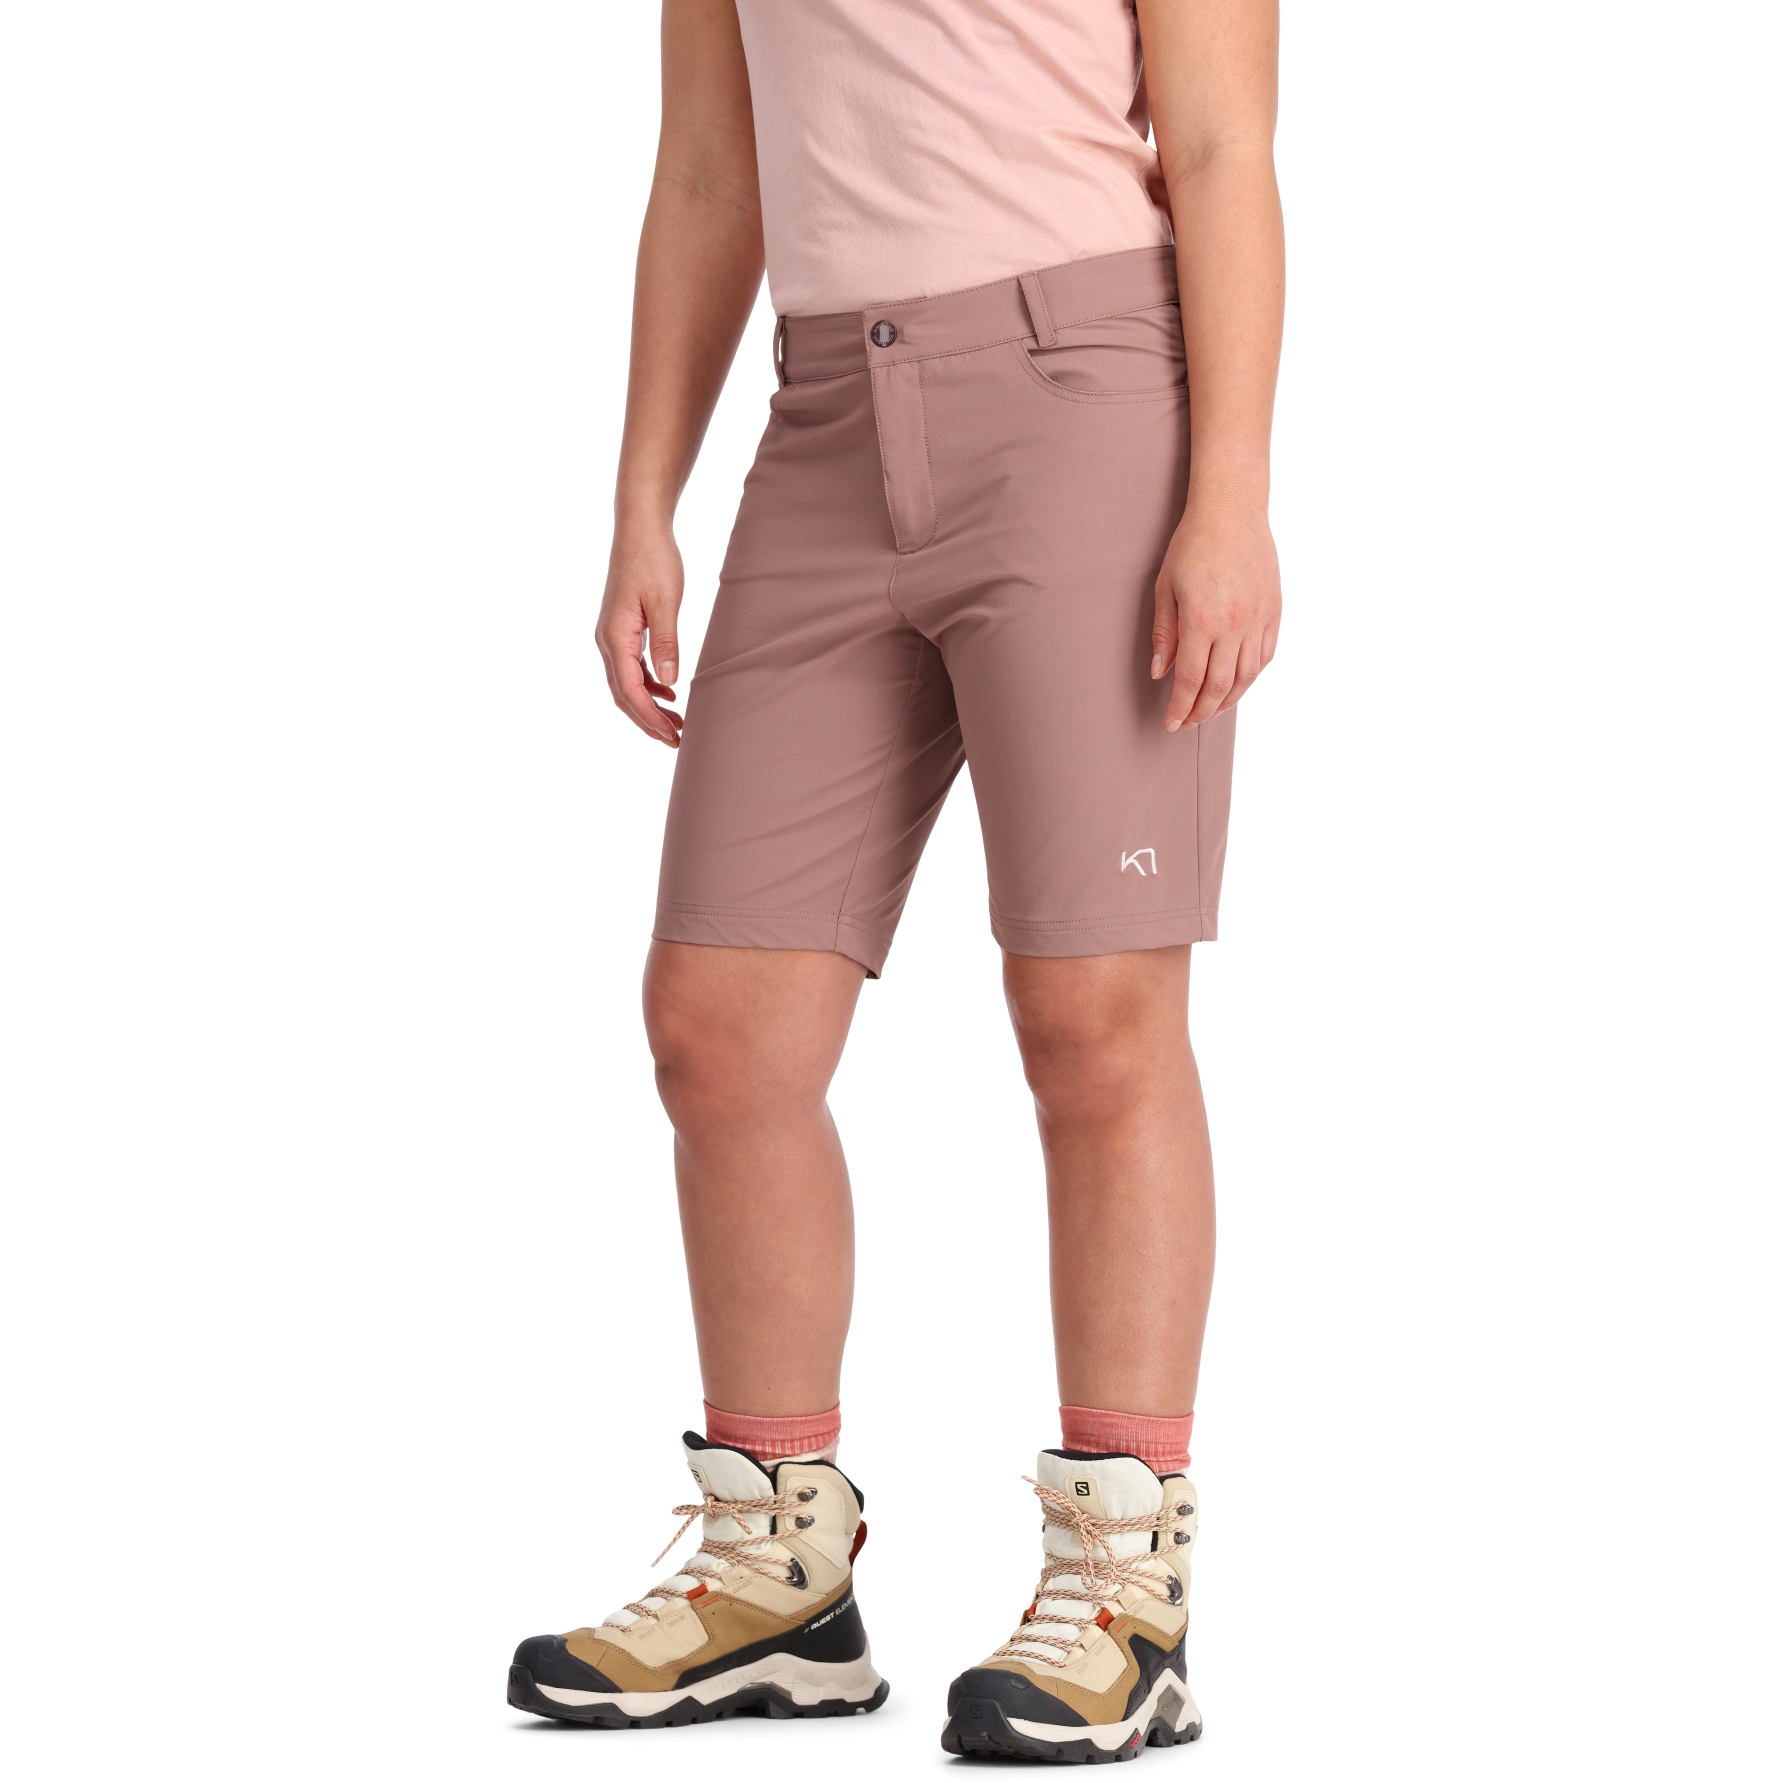 Picture of Kari Traa Thale Hiking Shorts Women - taupe